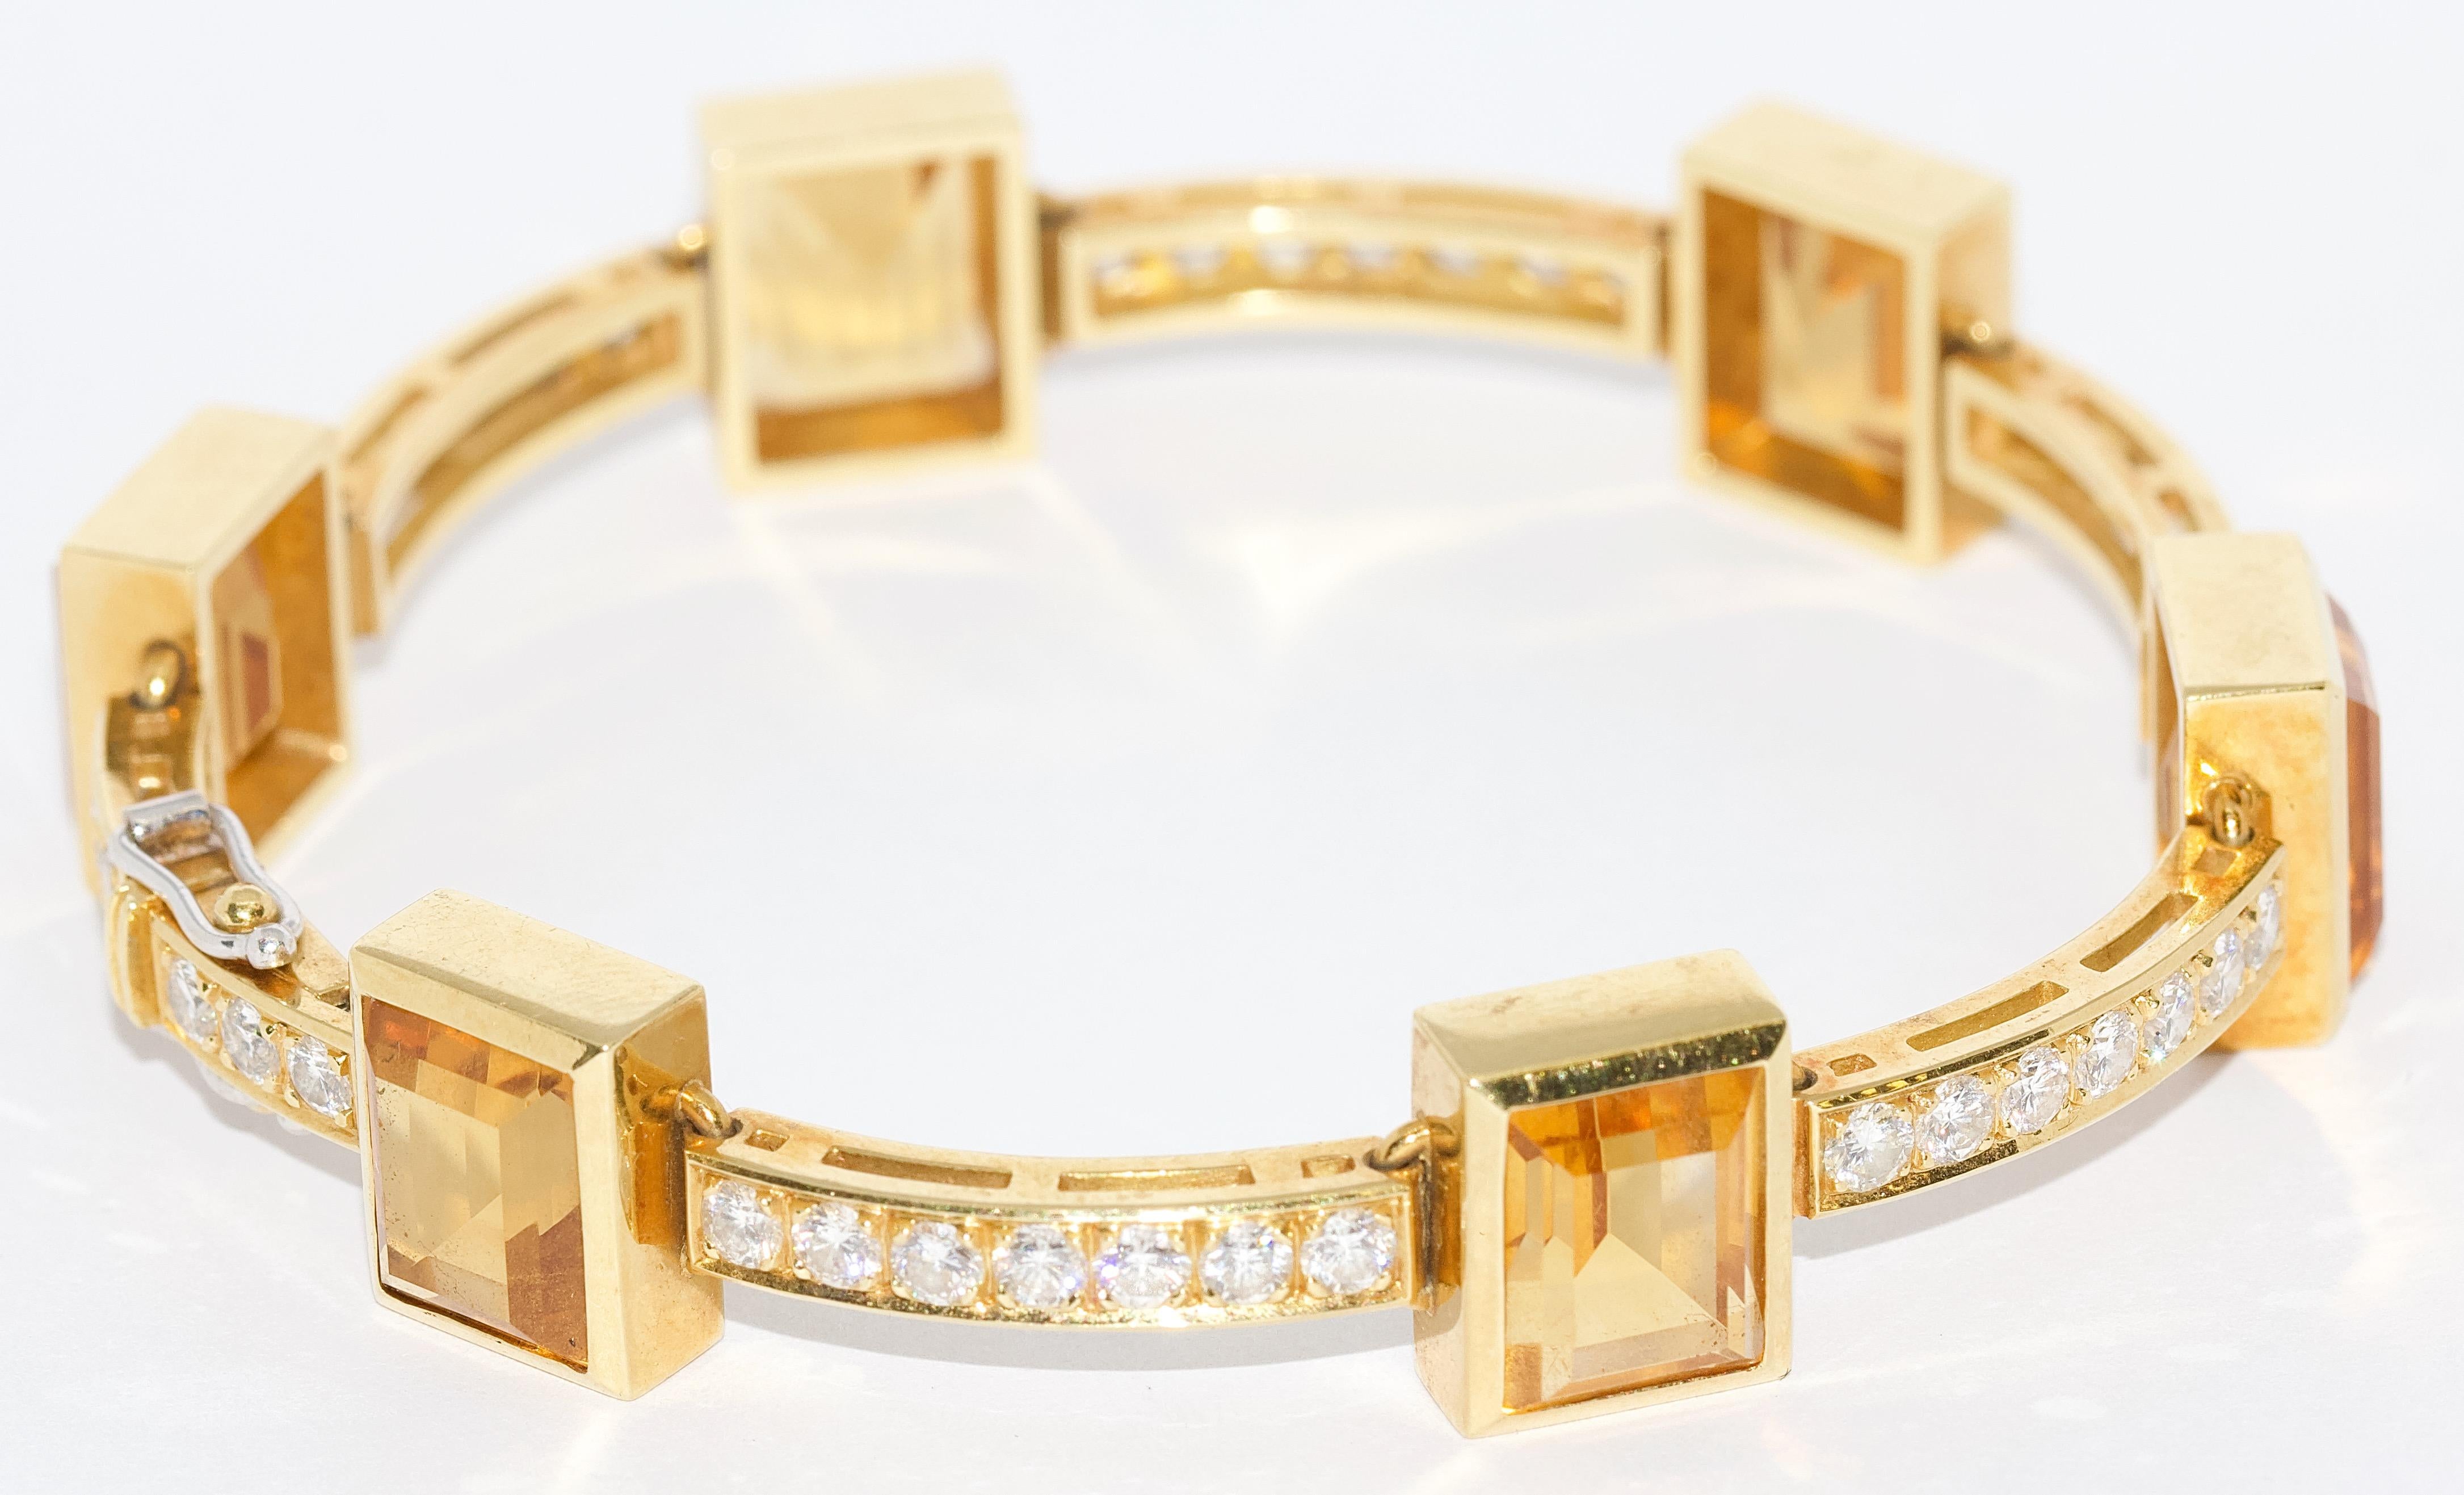 Modern ladies bracelet, in 18 Karat gold, set with citrines and 41 diamonds.

The bracelet is set with 41 round diamonds, Top Wesselton, VVS1 with a total weight of about 2.5 carat and six faceted citrines.

Perfect condition.
Including certificate